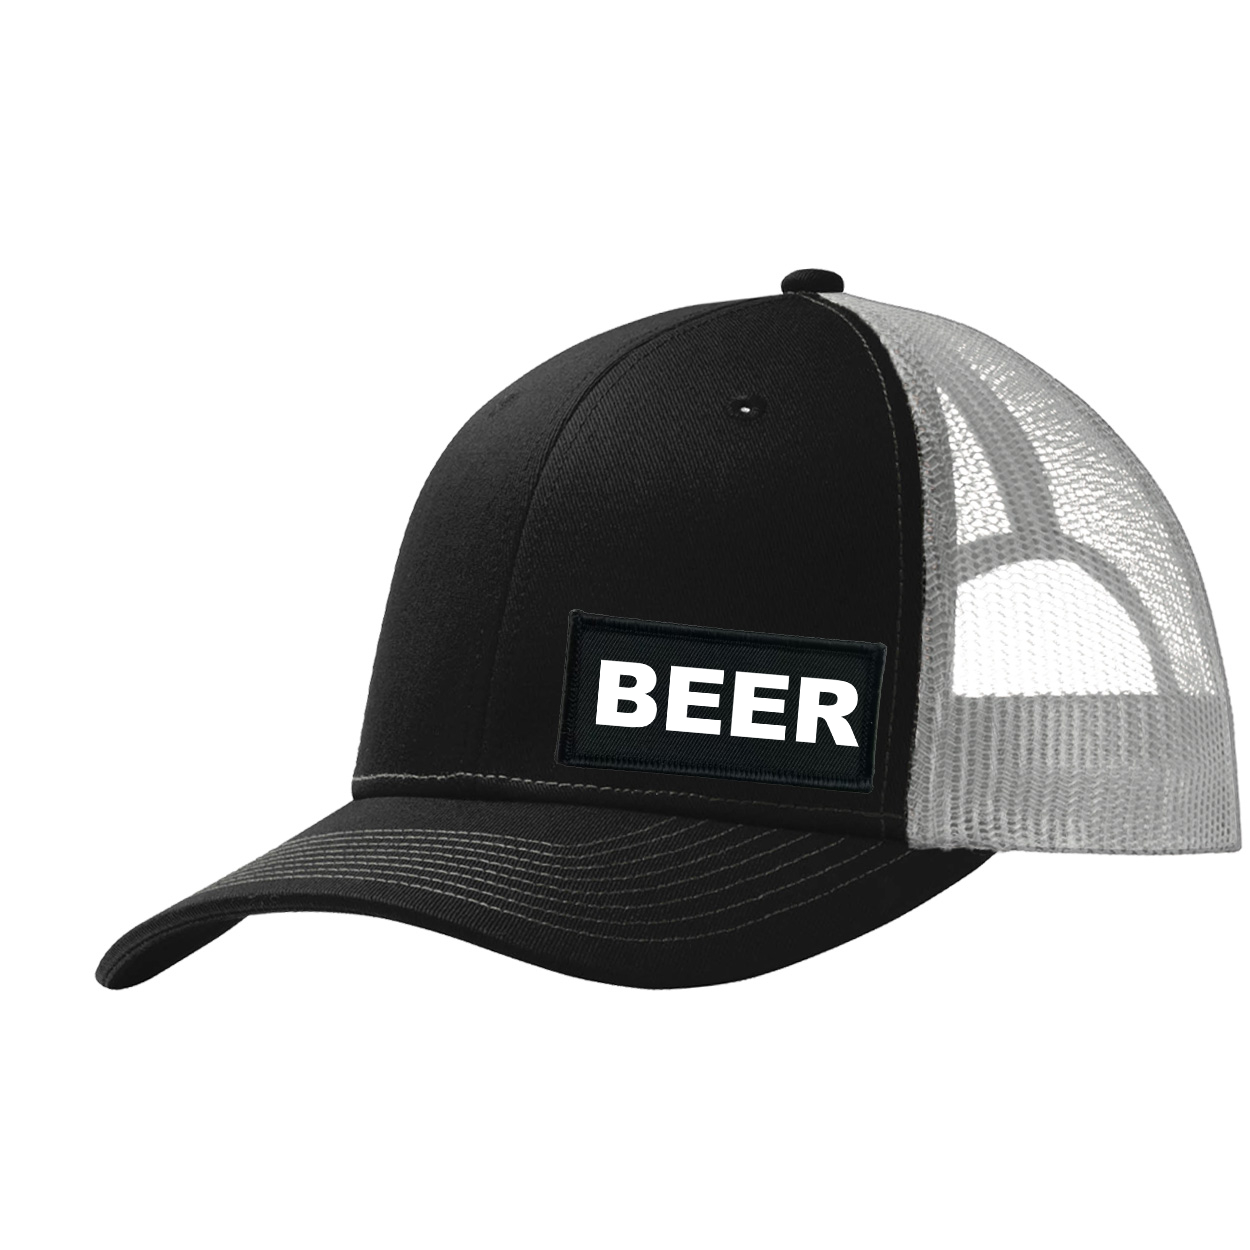 Beer Brand Logo Night Out Woven Patch Snapback Trucker Hat Black/Gray 